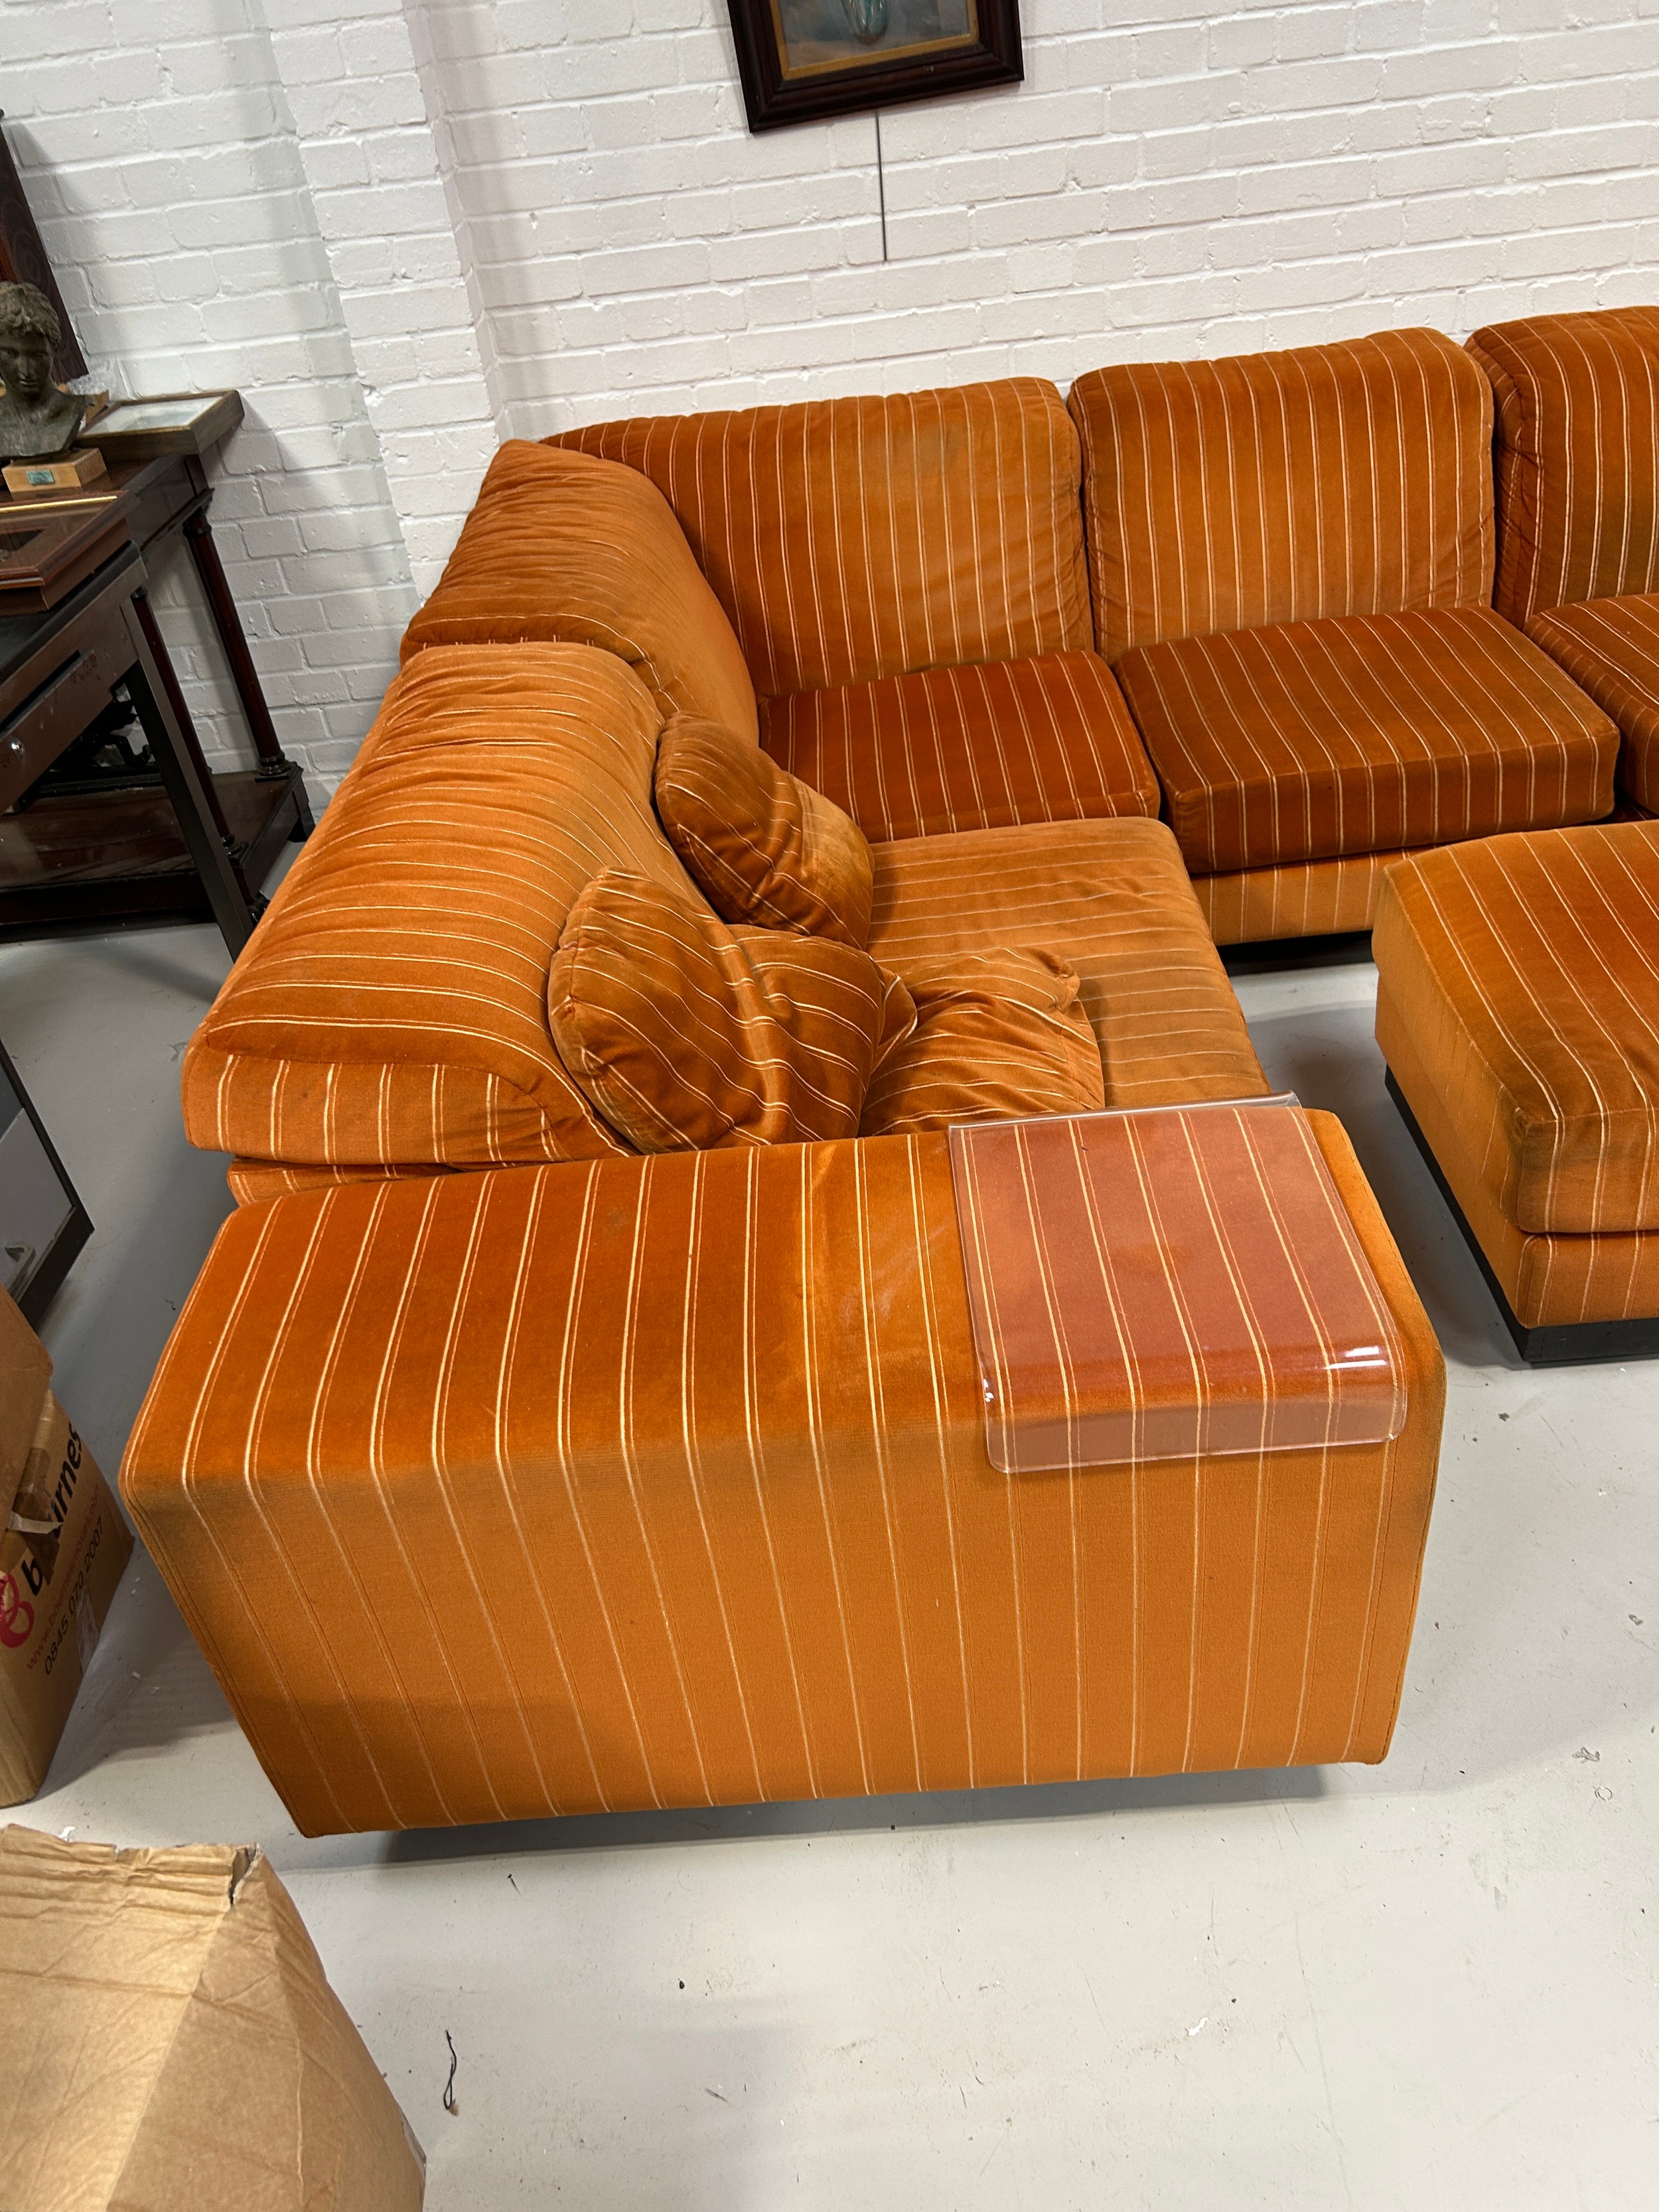 HOWARD KEITH: A LARGE SECTIONAL CORNER SOFA UPHOLSTERED IN STRIPED BURNT ORANGE FABRIC, 300cm x - Image 5 of 5